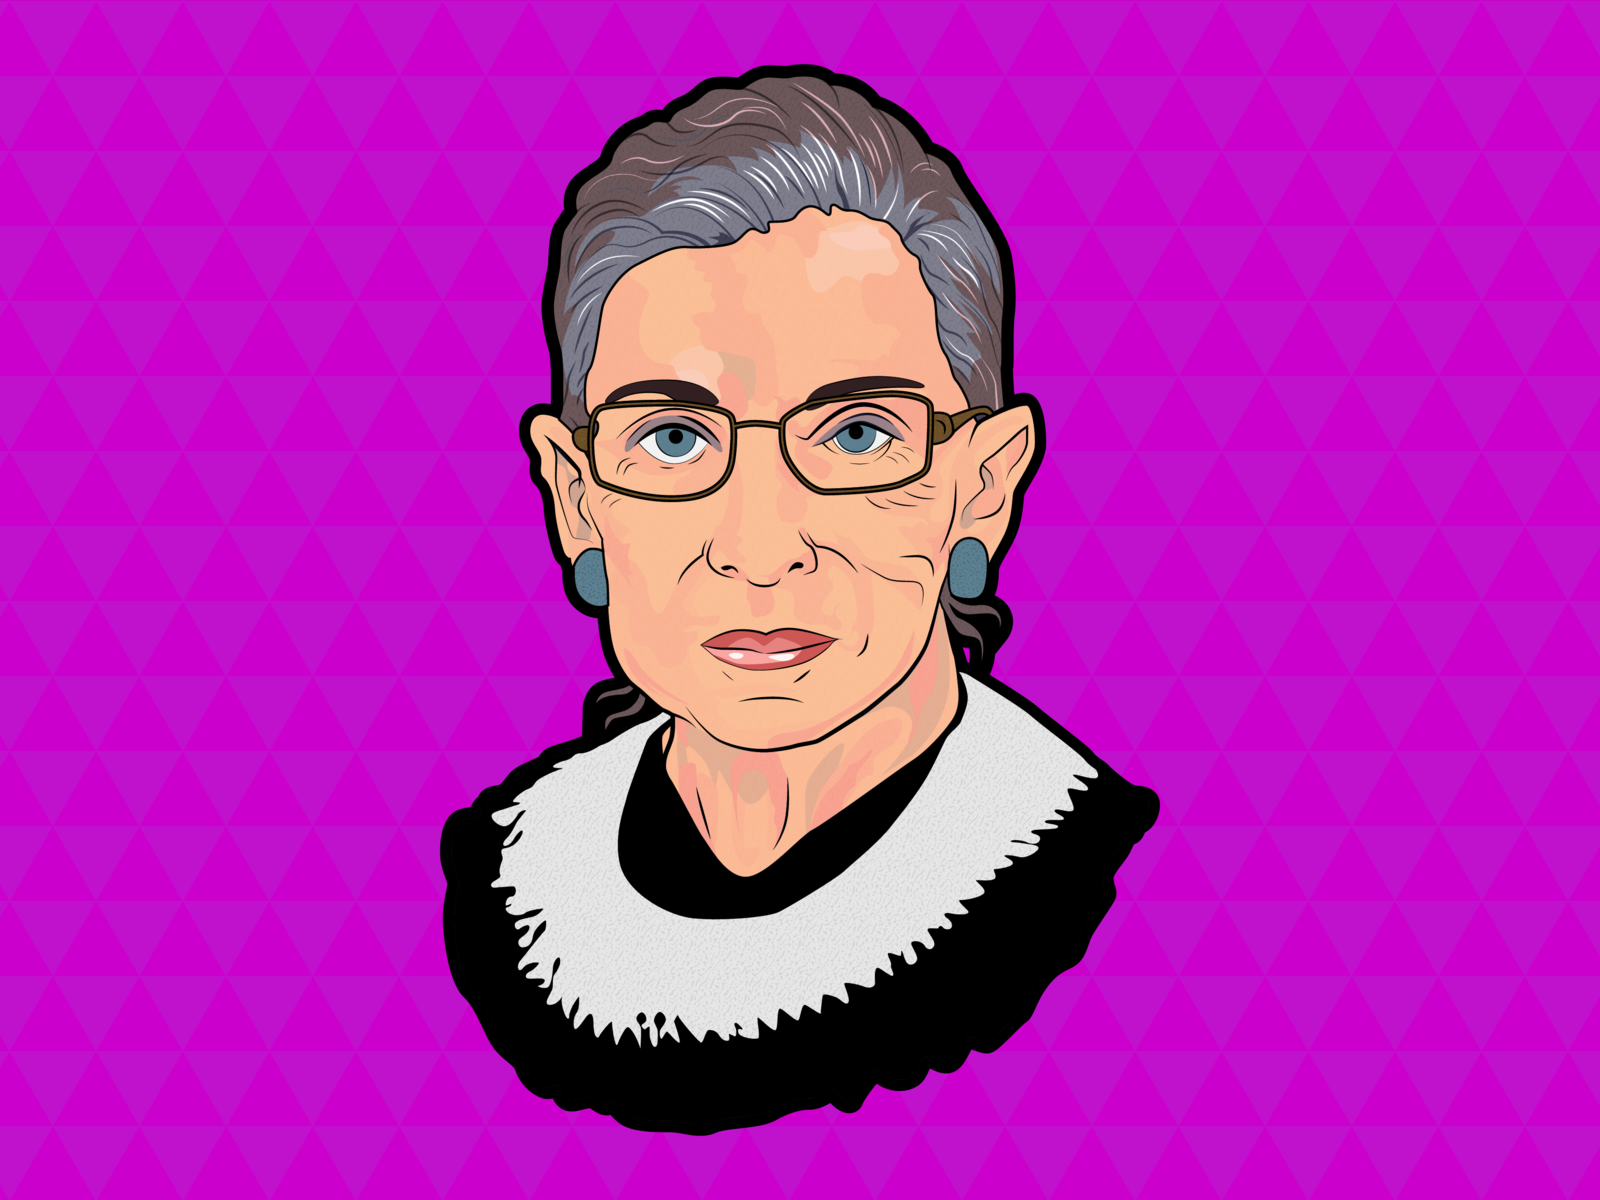 Ruth Bader Ginsburg by Anthony Savage on Dribbble